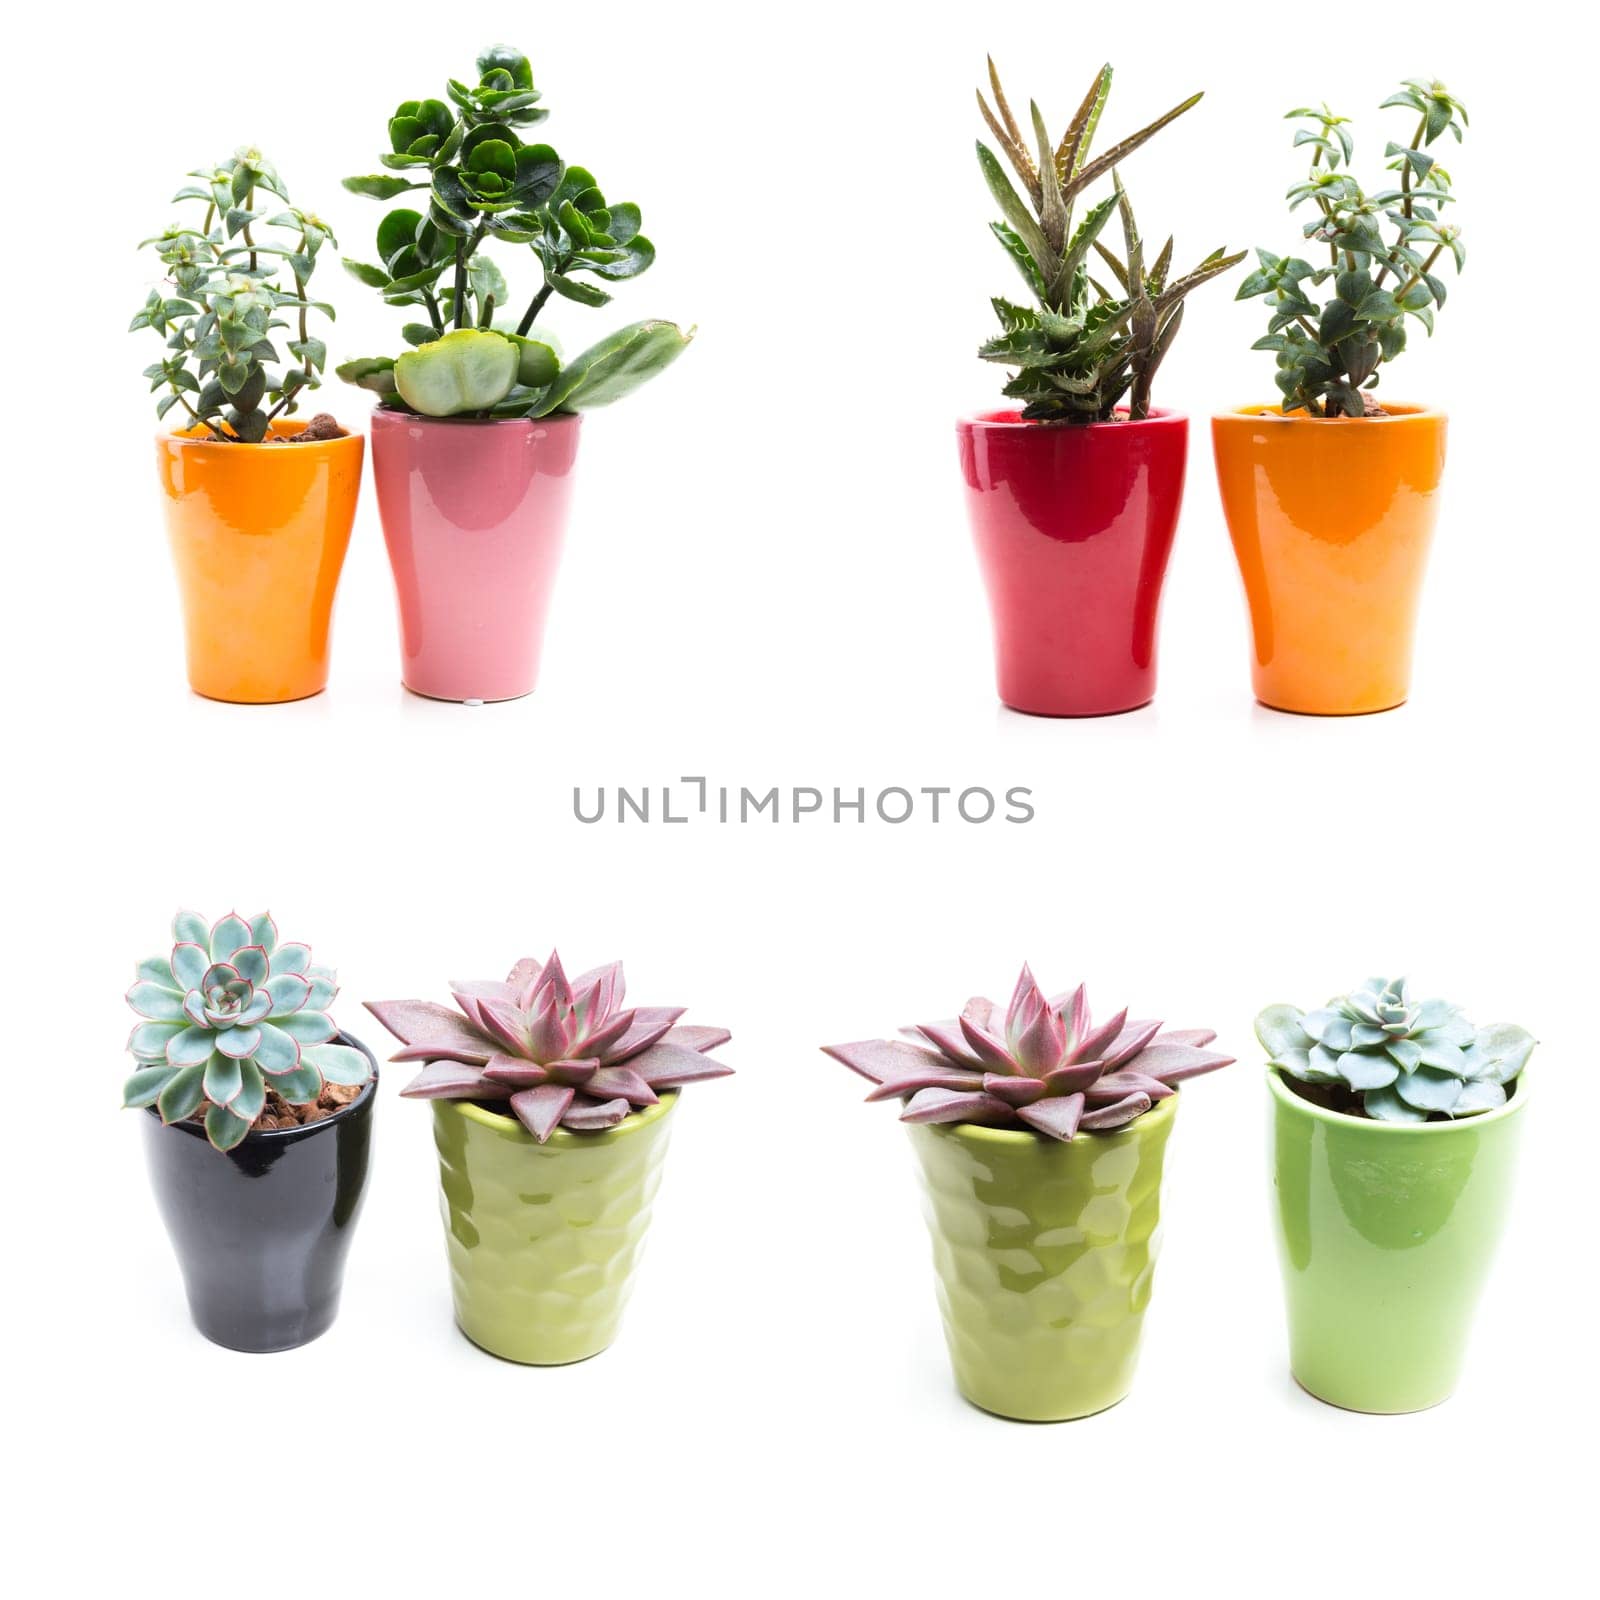 green plants in flower pots on white background by Fabrikasimf